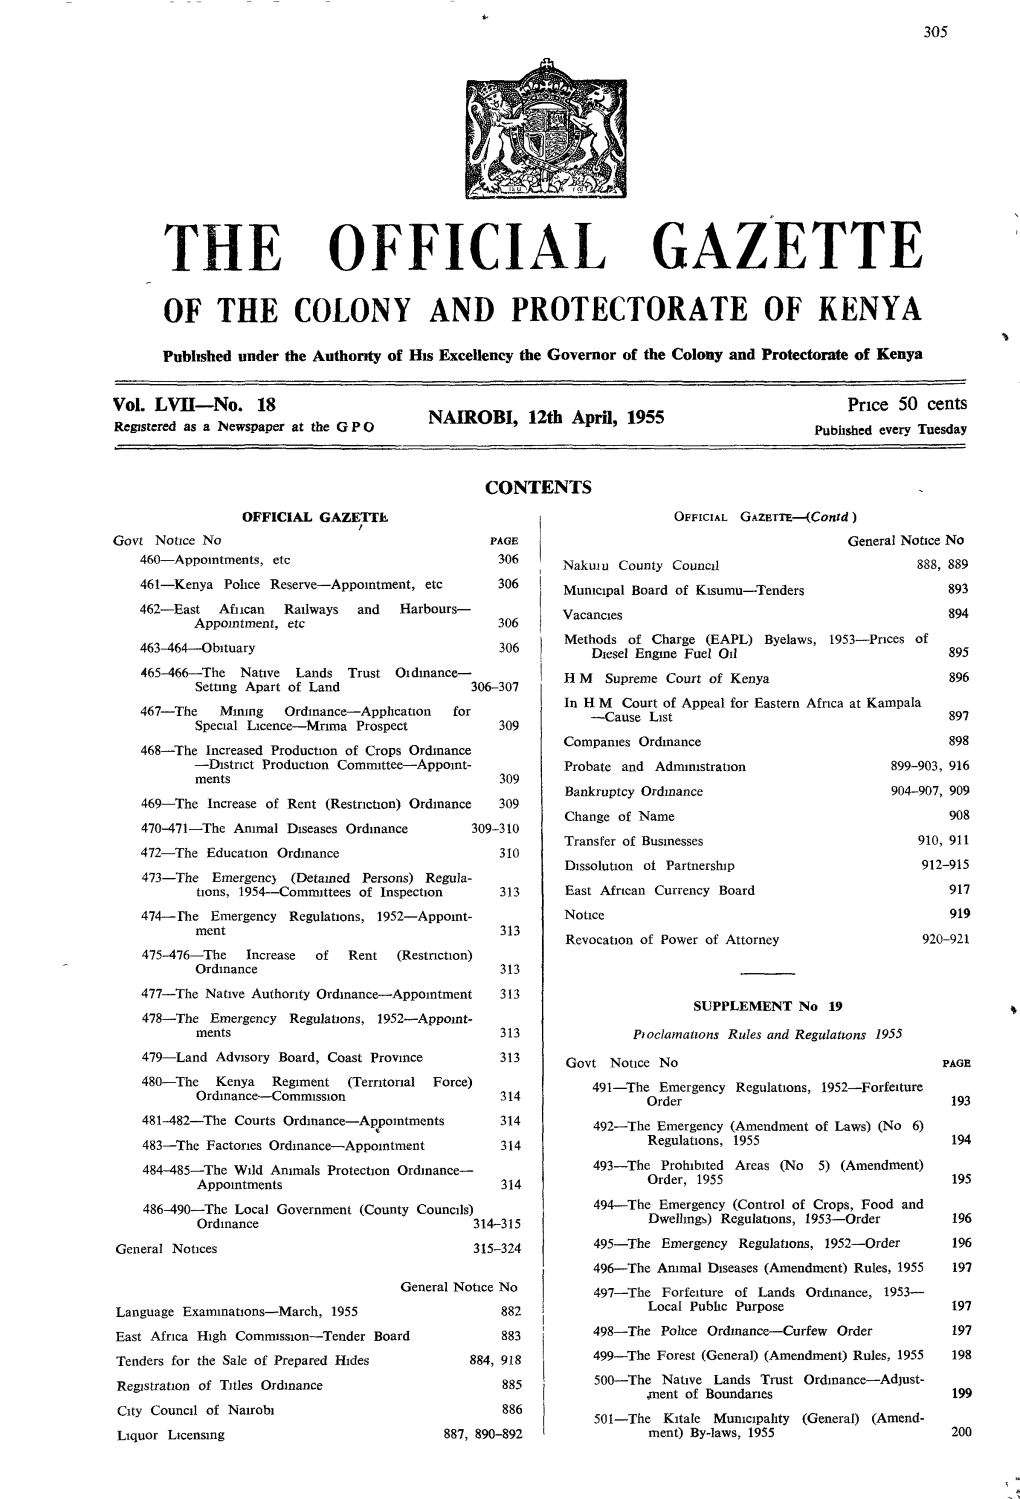 The Official Gazette of the Colony and Protectorate of Kenya